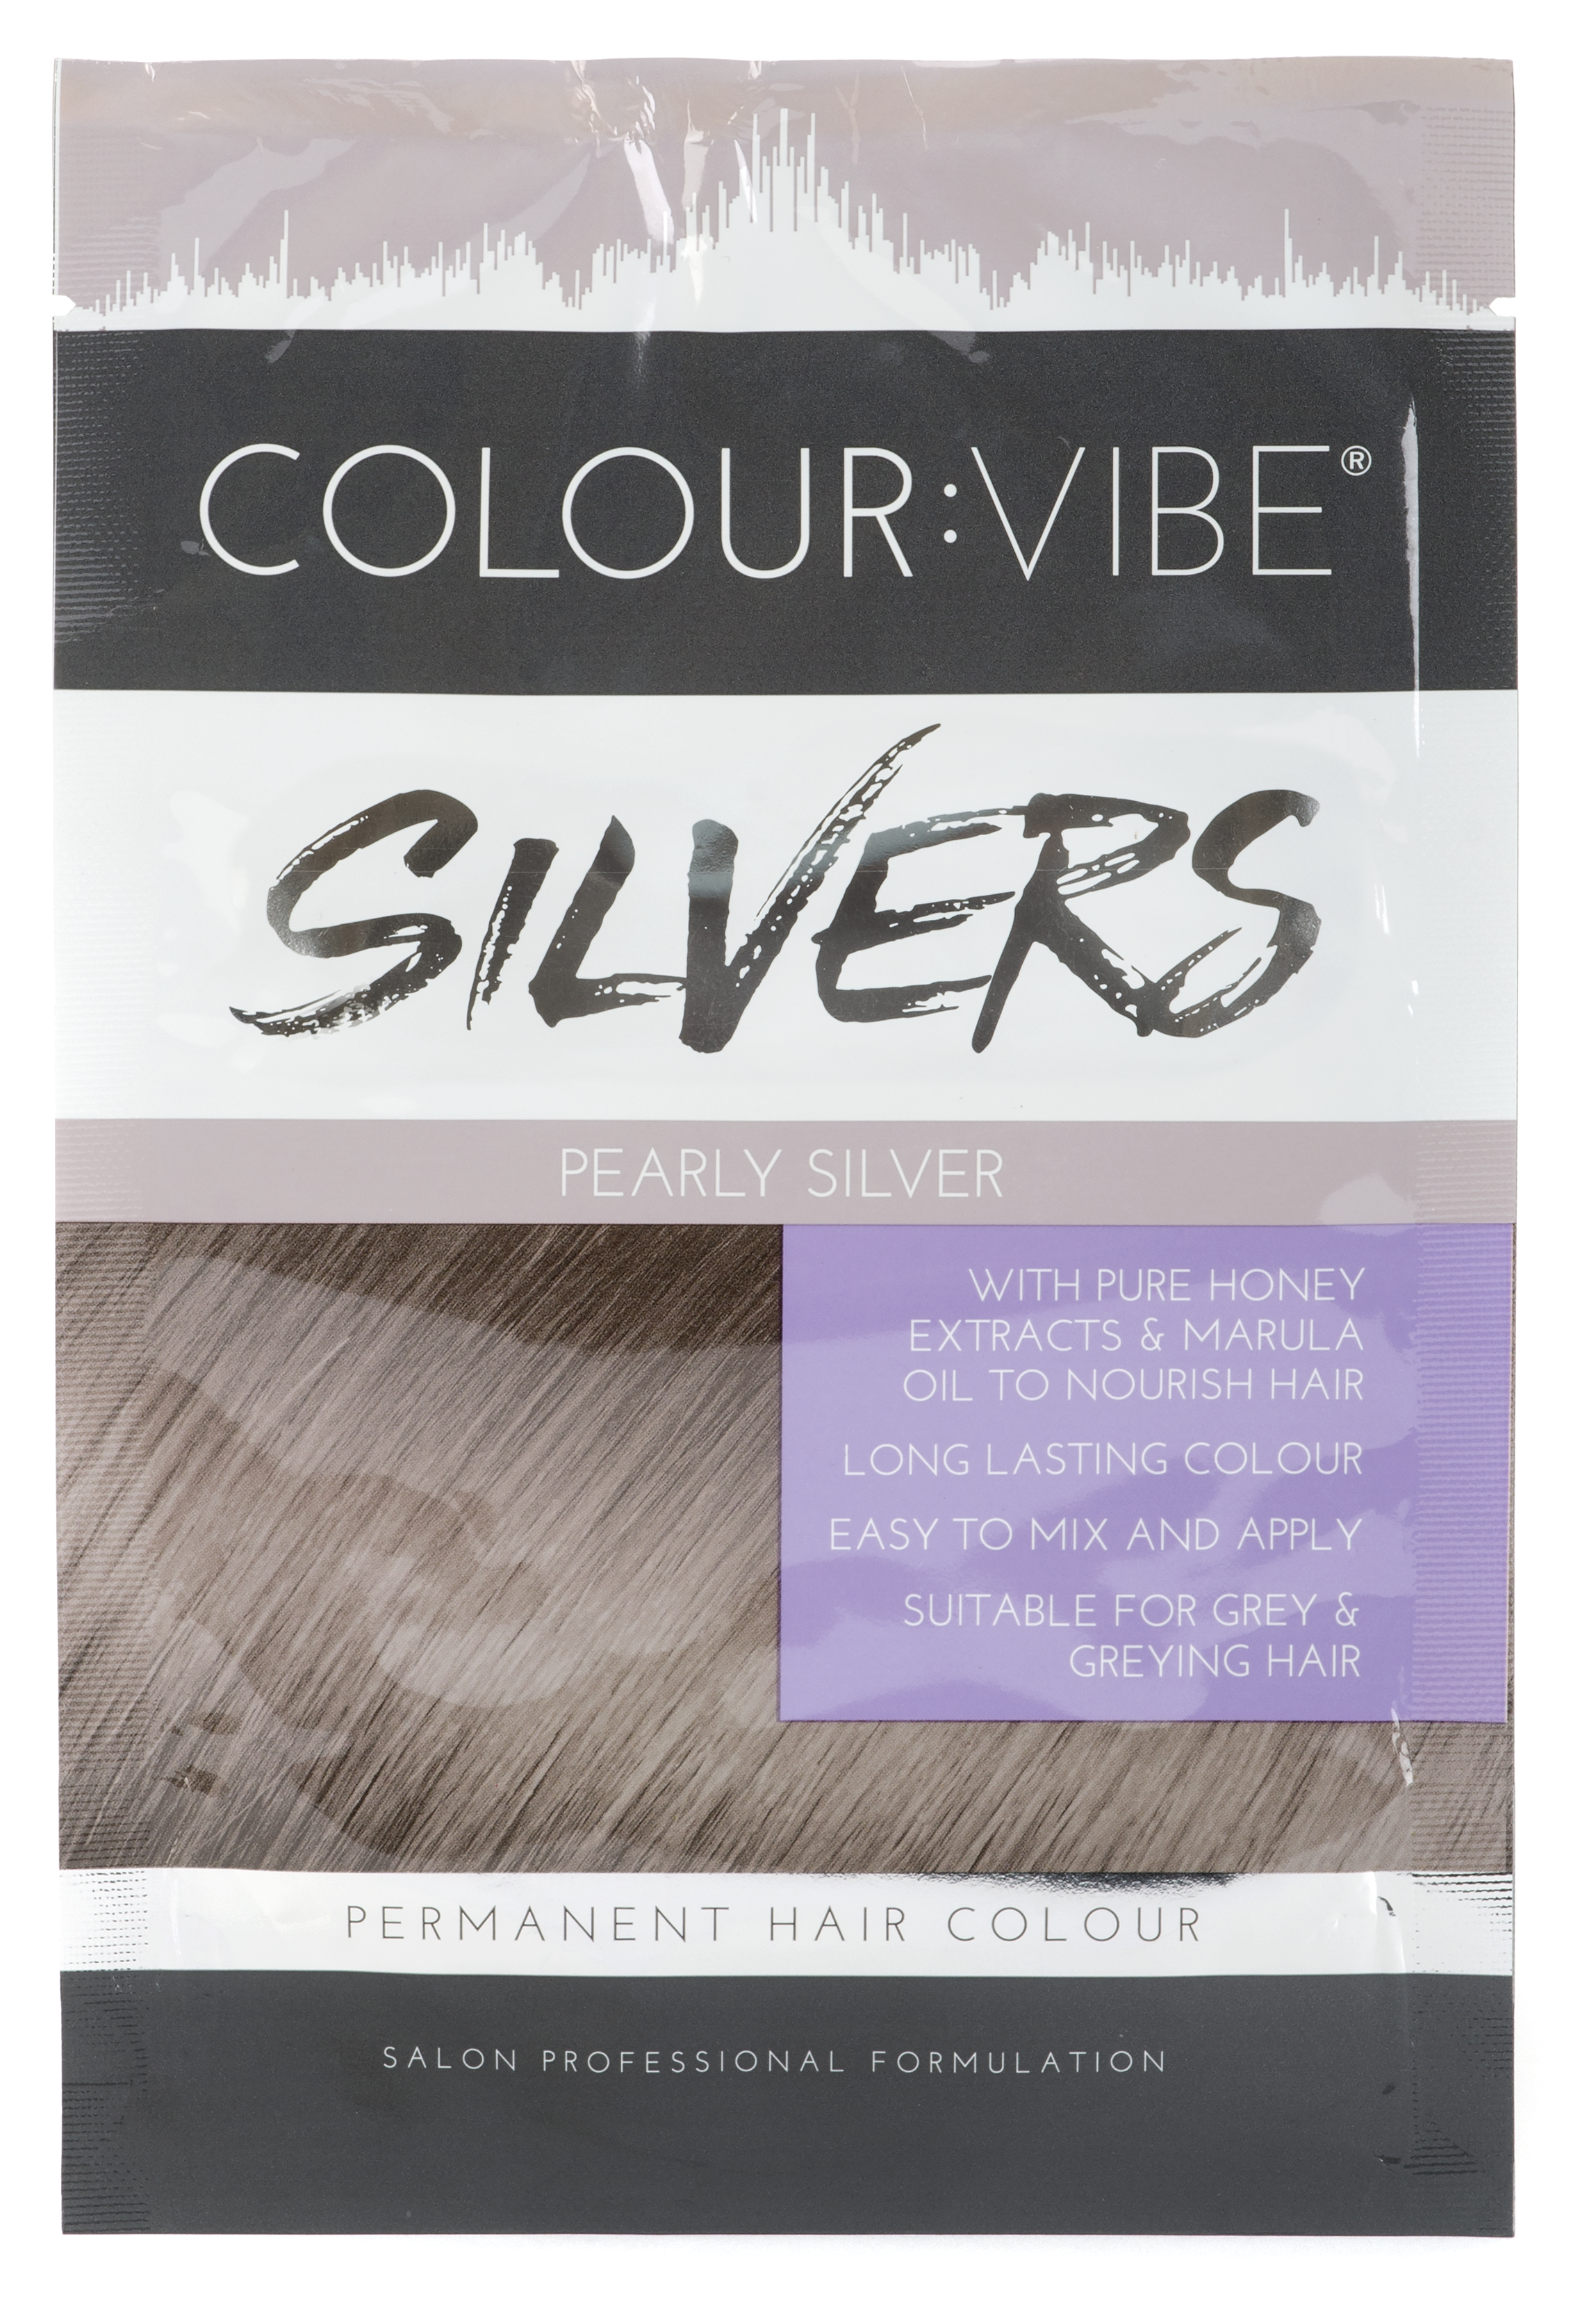 Colour:Vibe Silvers Permanent Pearly Silver